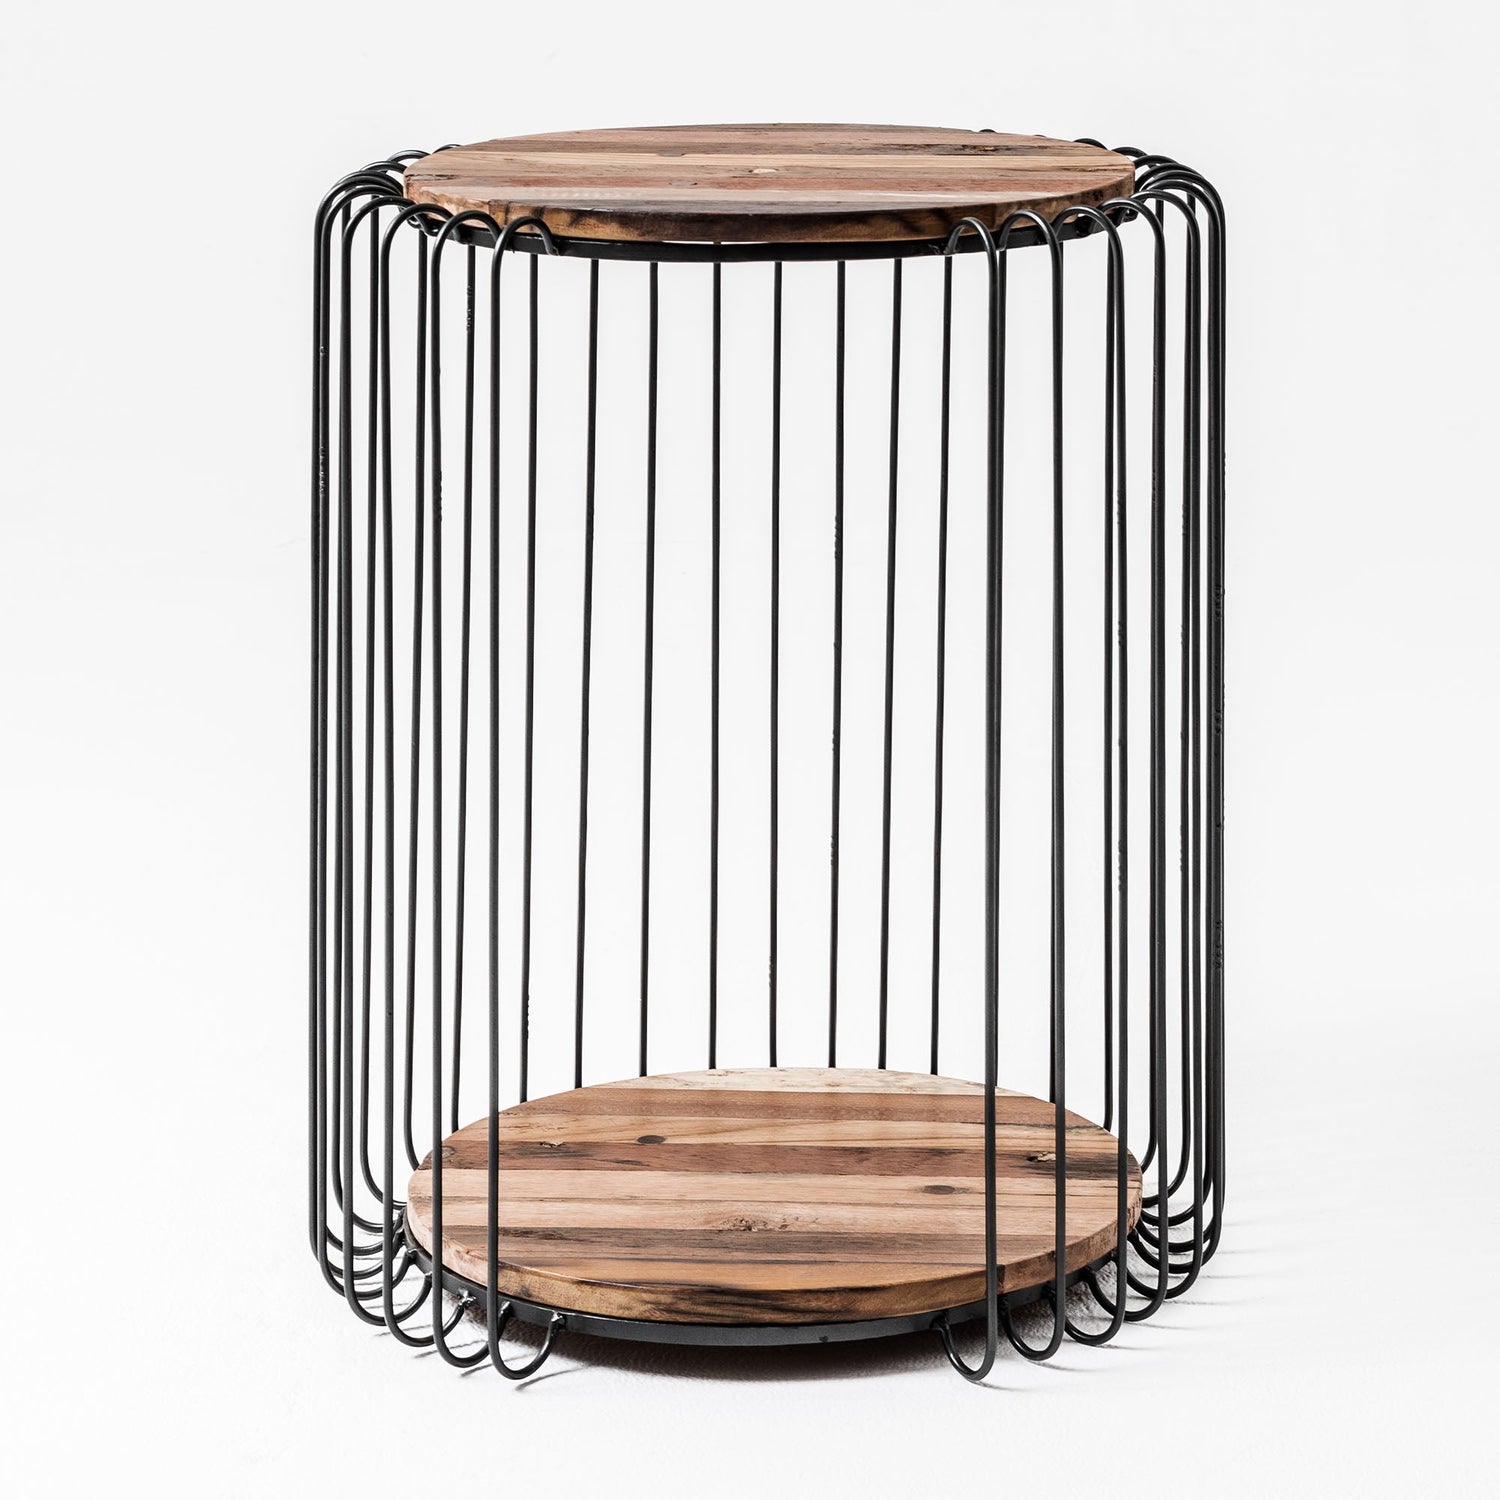 Barca Round side table